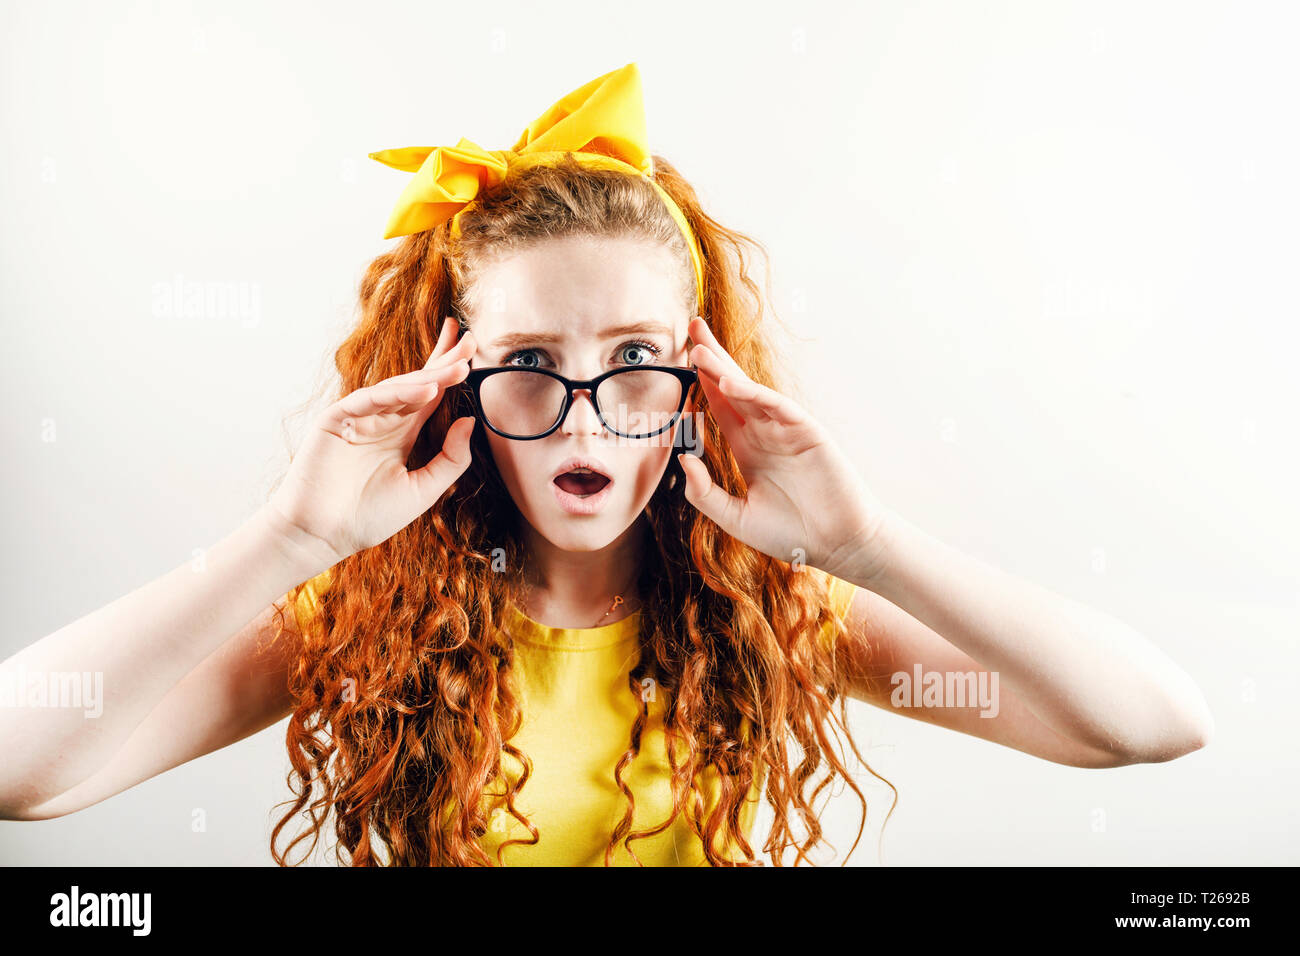 Surprised curly redhead girl in glasses with a yellow bow on her head wearing yellow t-shirt looking to the camera with schoked emotion Stock Photo